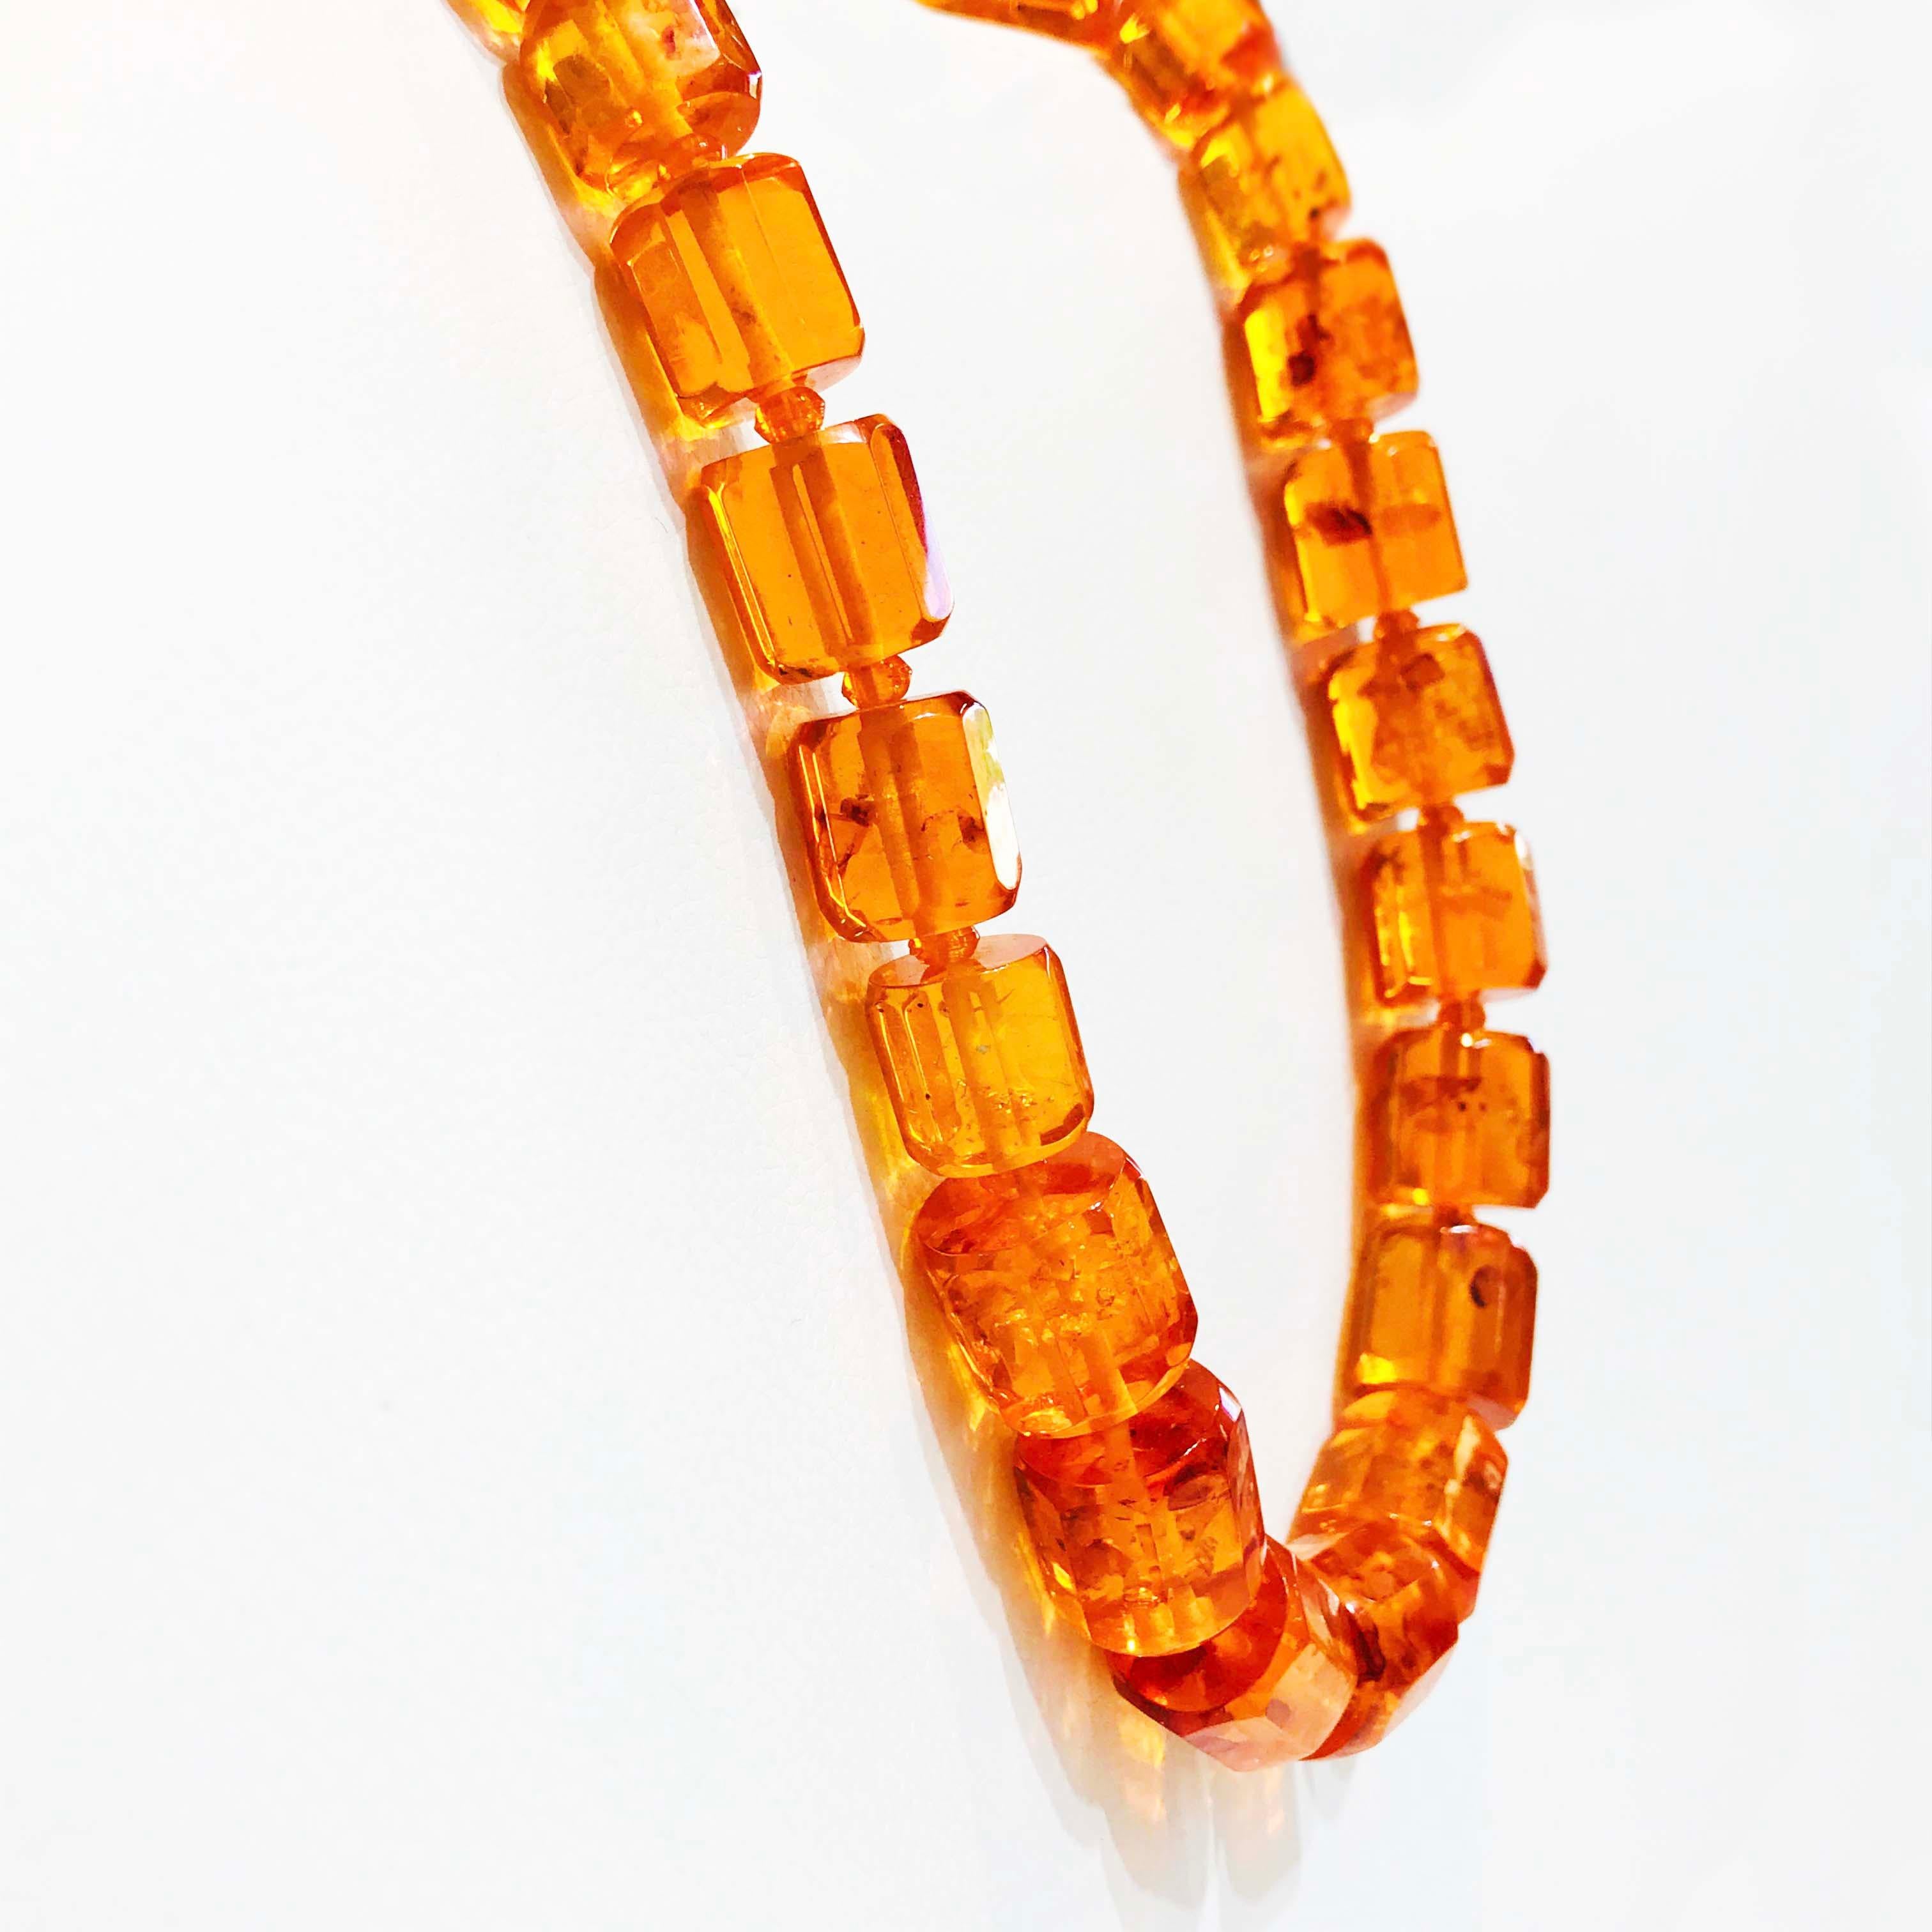 These Baltic Sea Amber beads are one of a kind! Each bead is made with amazing genuine amber pieces that have been hand made and polished to produce the most unique design. The necklace is 30 inches long and comfortable to wear! The bold amber goes